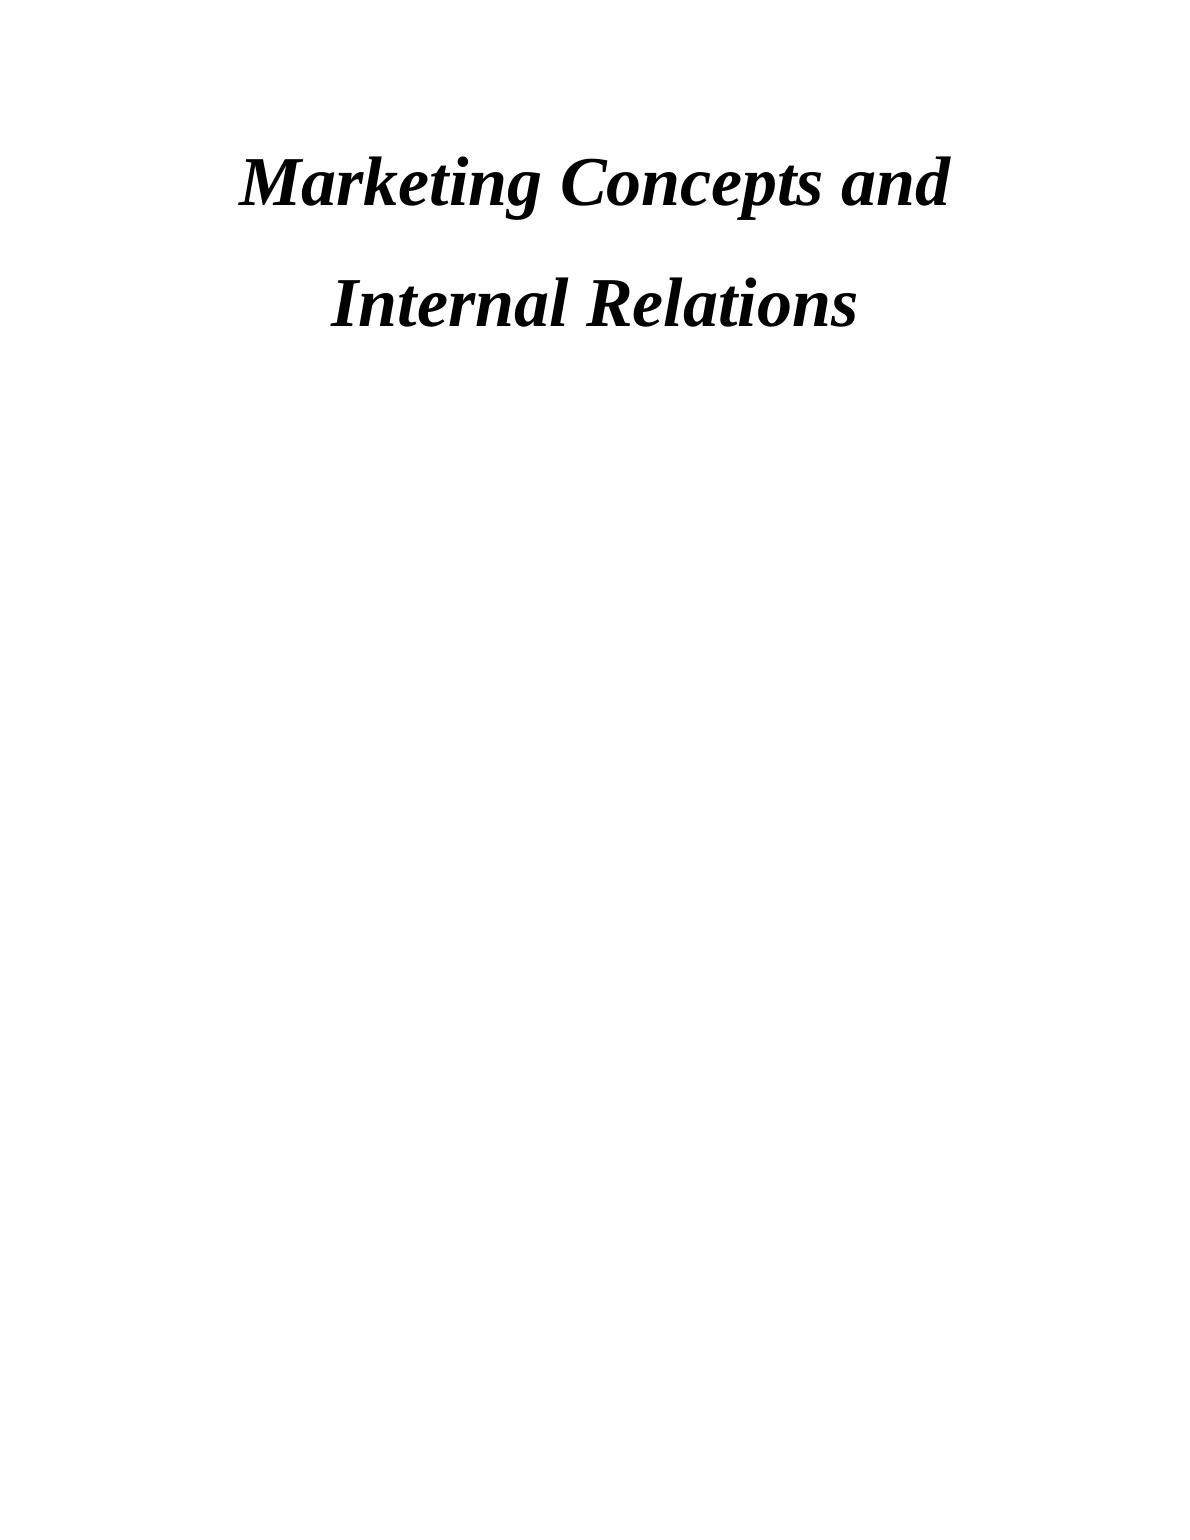 Marketing Concepts and Internal Relations_1